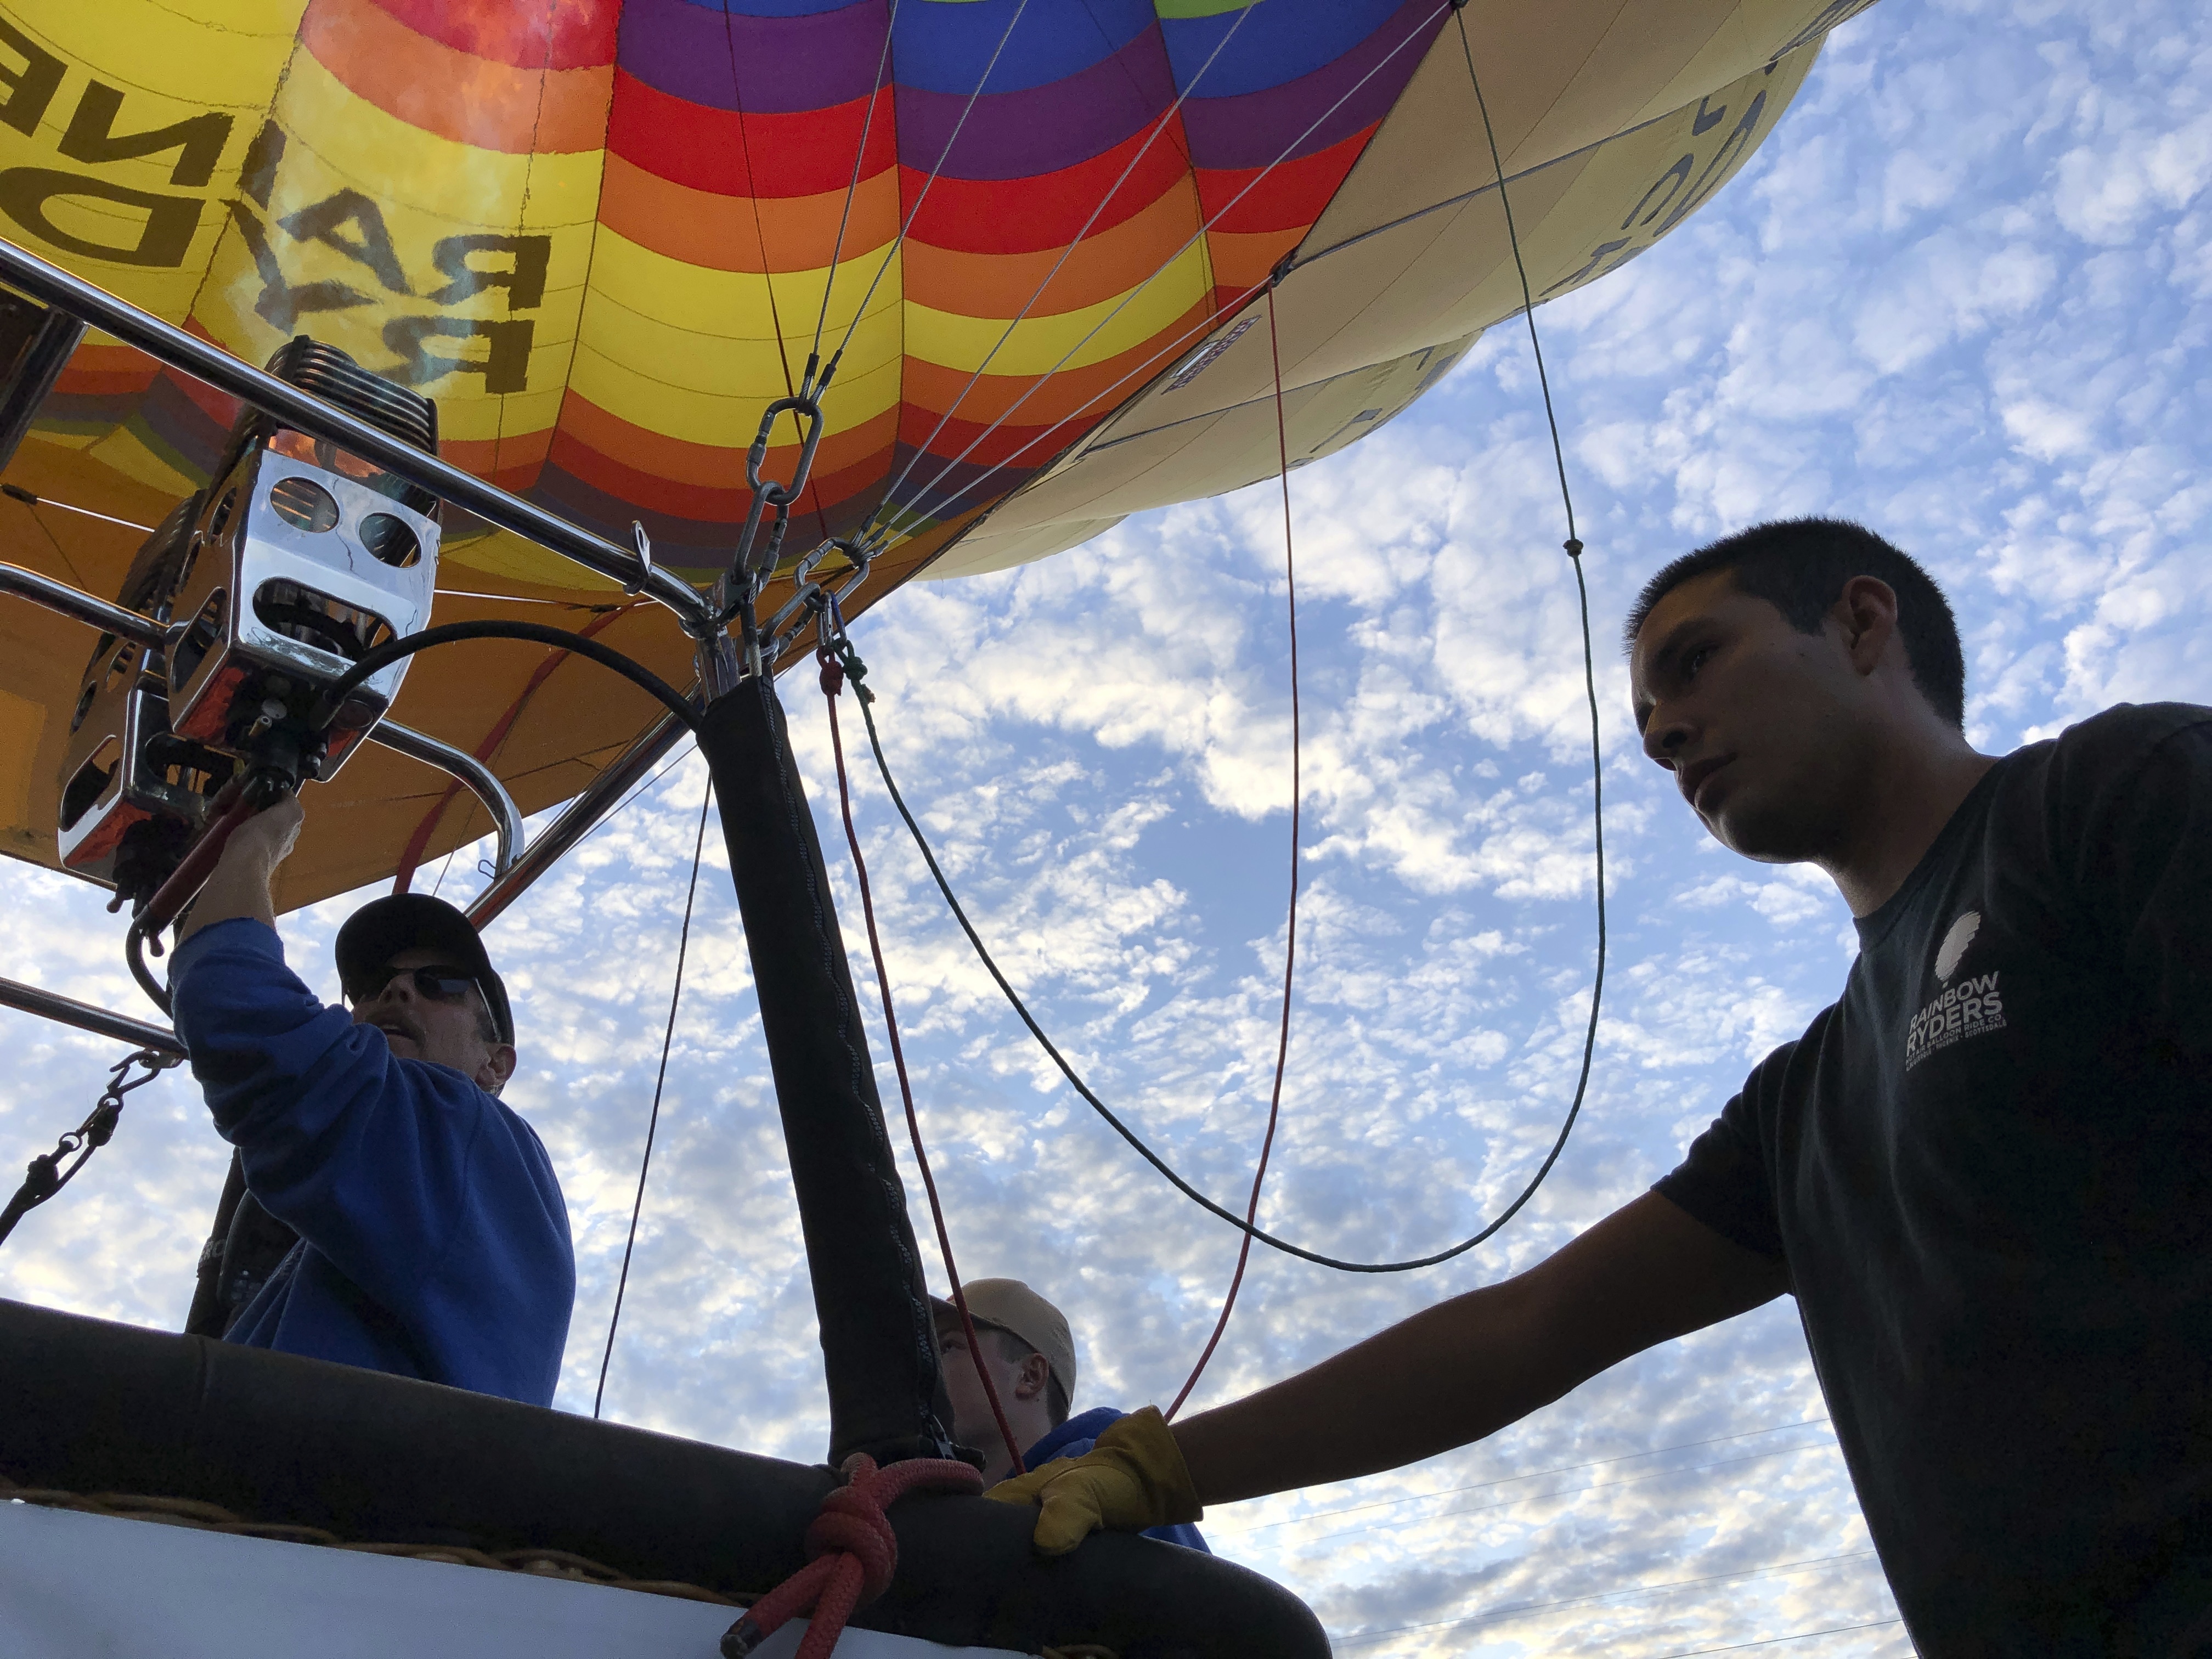 Elijah Sanchez, right, helps pilot Troy Bradley, left, prepare for liftoff in Albuquerque, N.M., on Tuesday, Oct. 1, 2019. Sanchez, 20, will be among the youngest pilots to launch as part of this year's Albuquerque International Balloon Fiesta. The nine-day event is expected to draw several hundred thousand spectators and hundreds of balloonists from around the world. It will kick off Oct. 5 with a mass ascension. (AP Photo/Susan Montoya Bryan)